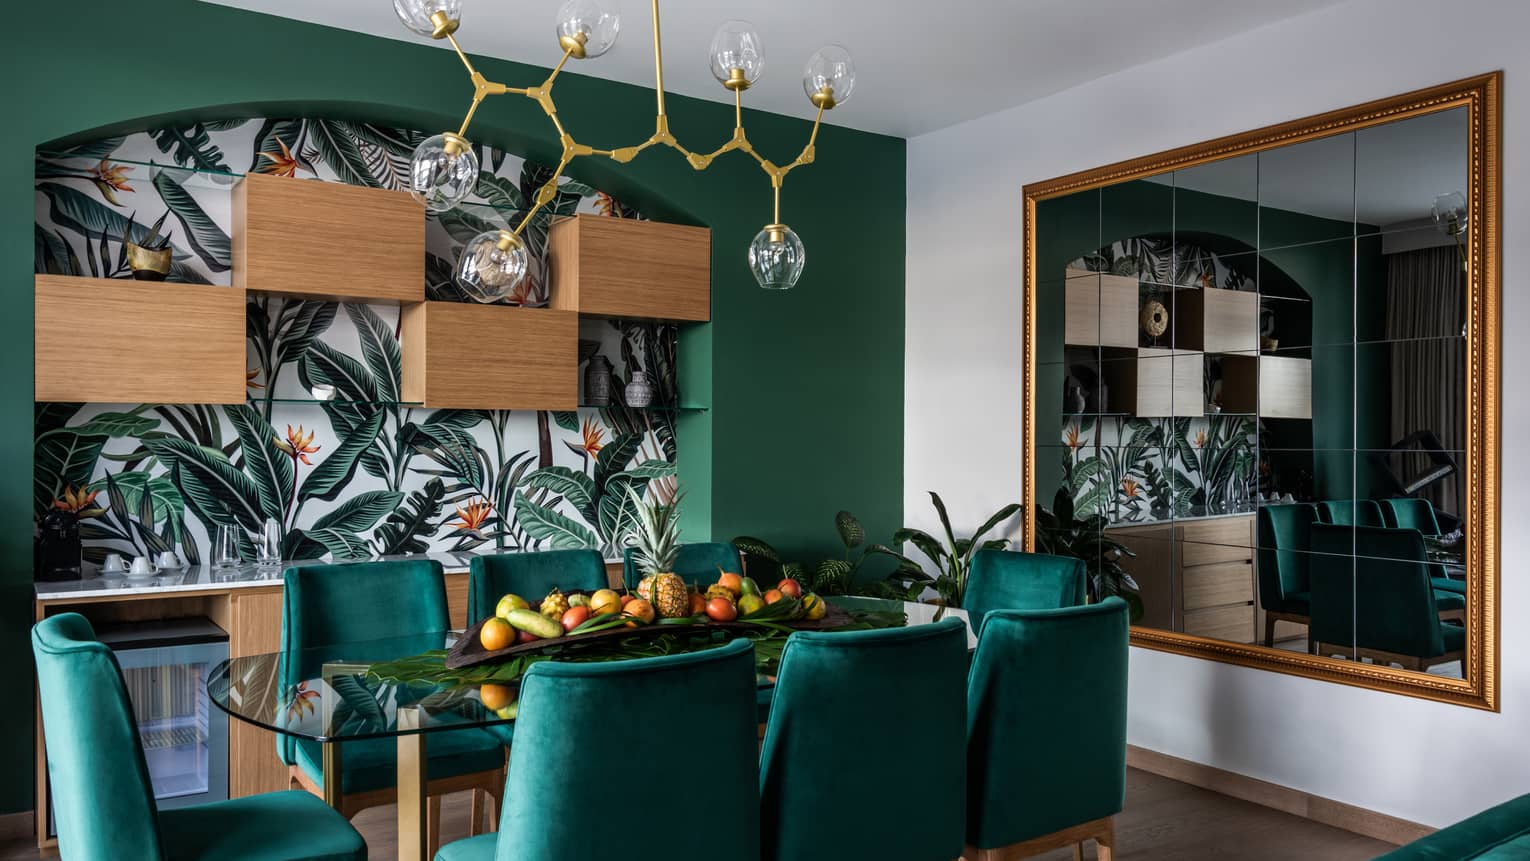 A dining area with emerald green chairs, a jungle mural and an Art Deco chandelier.